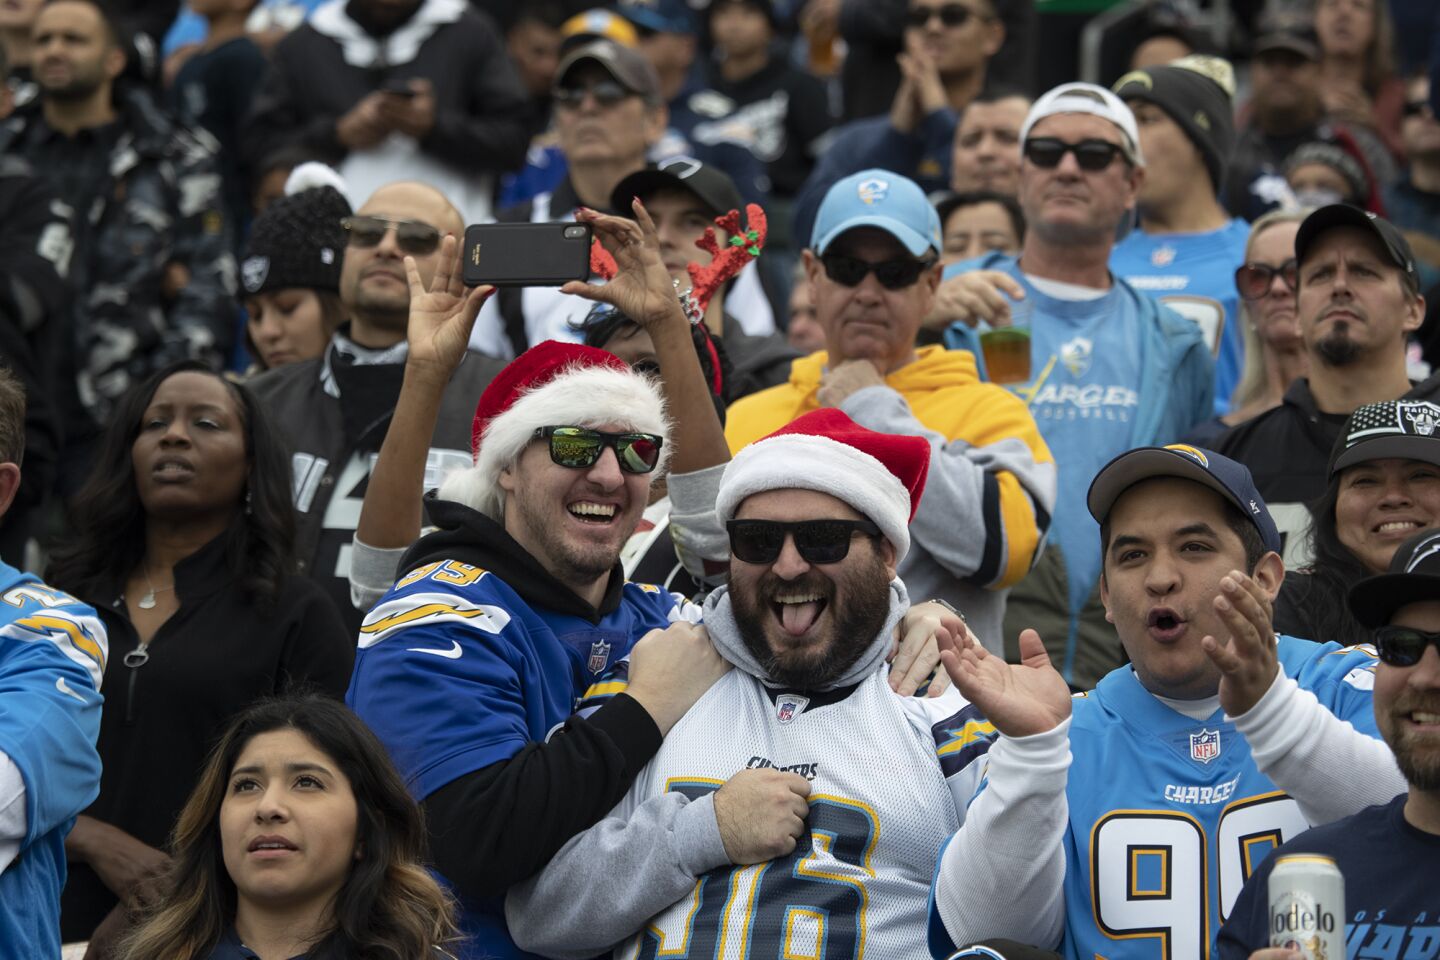 Chargers fans celebrate after a play against the Oakland Raiders.